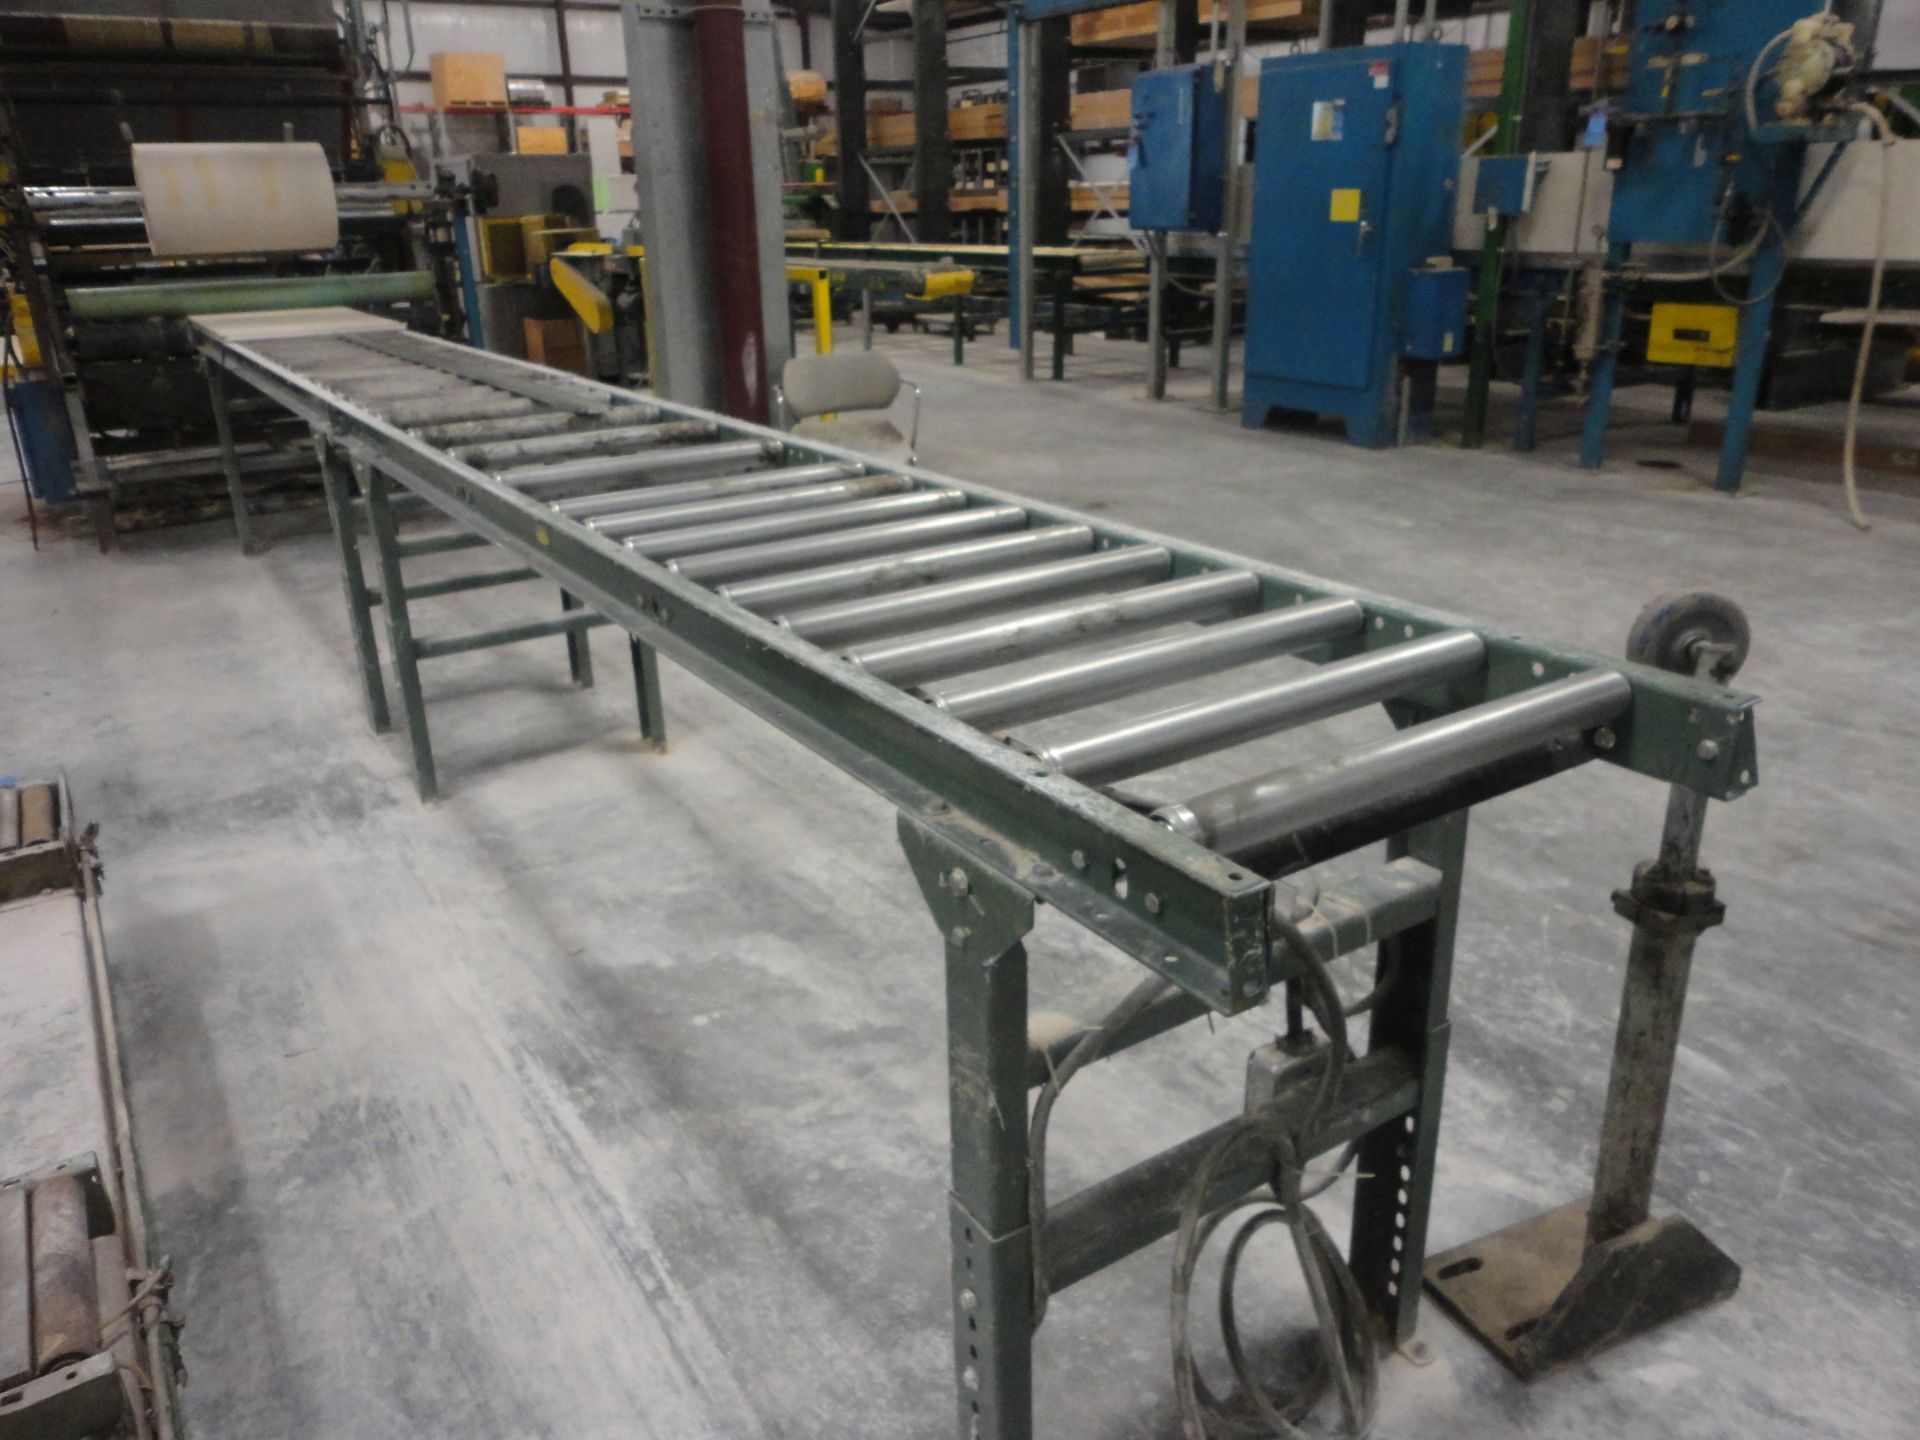 60" WIDE VINYL TO PANEL APPLICATION MACHINE ENTRY PINCH ROLLS, OVERHEAD VINYL ROLL FEED TO GLUE - Image 22 of 22